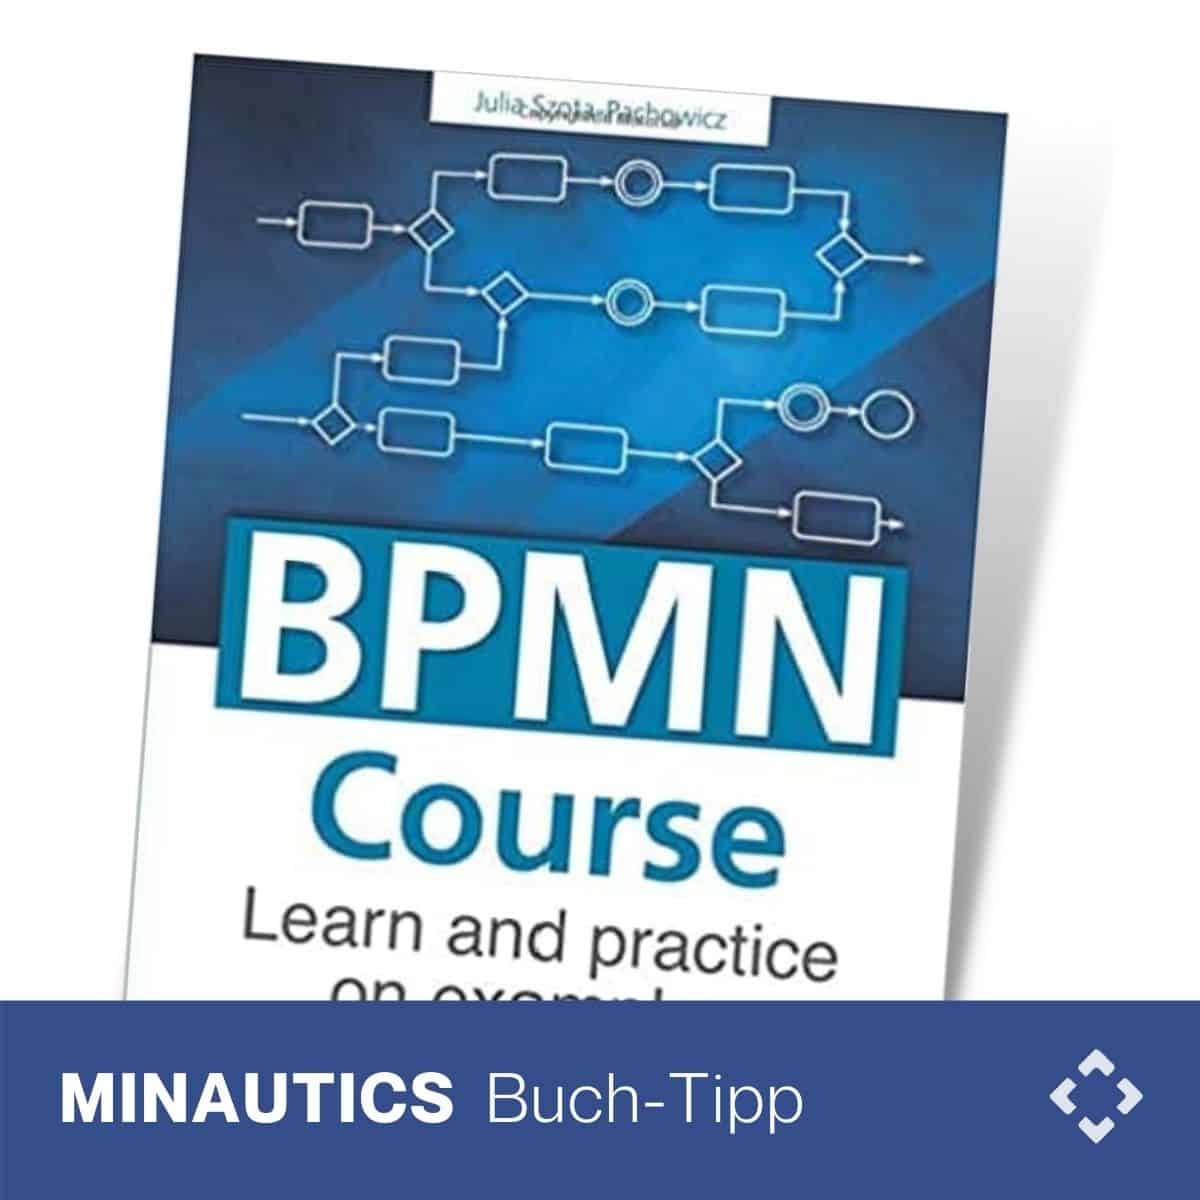 BPMN Course Learn and practice on examples 0 (0)